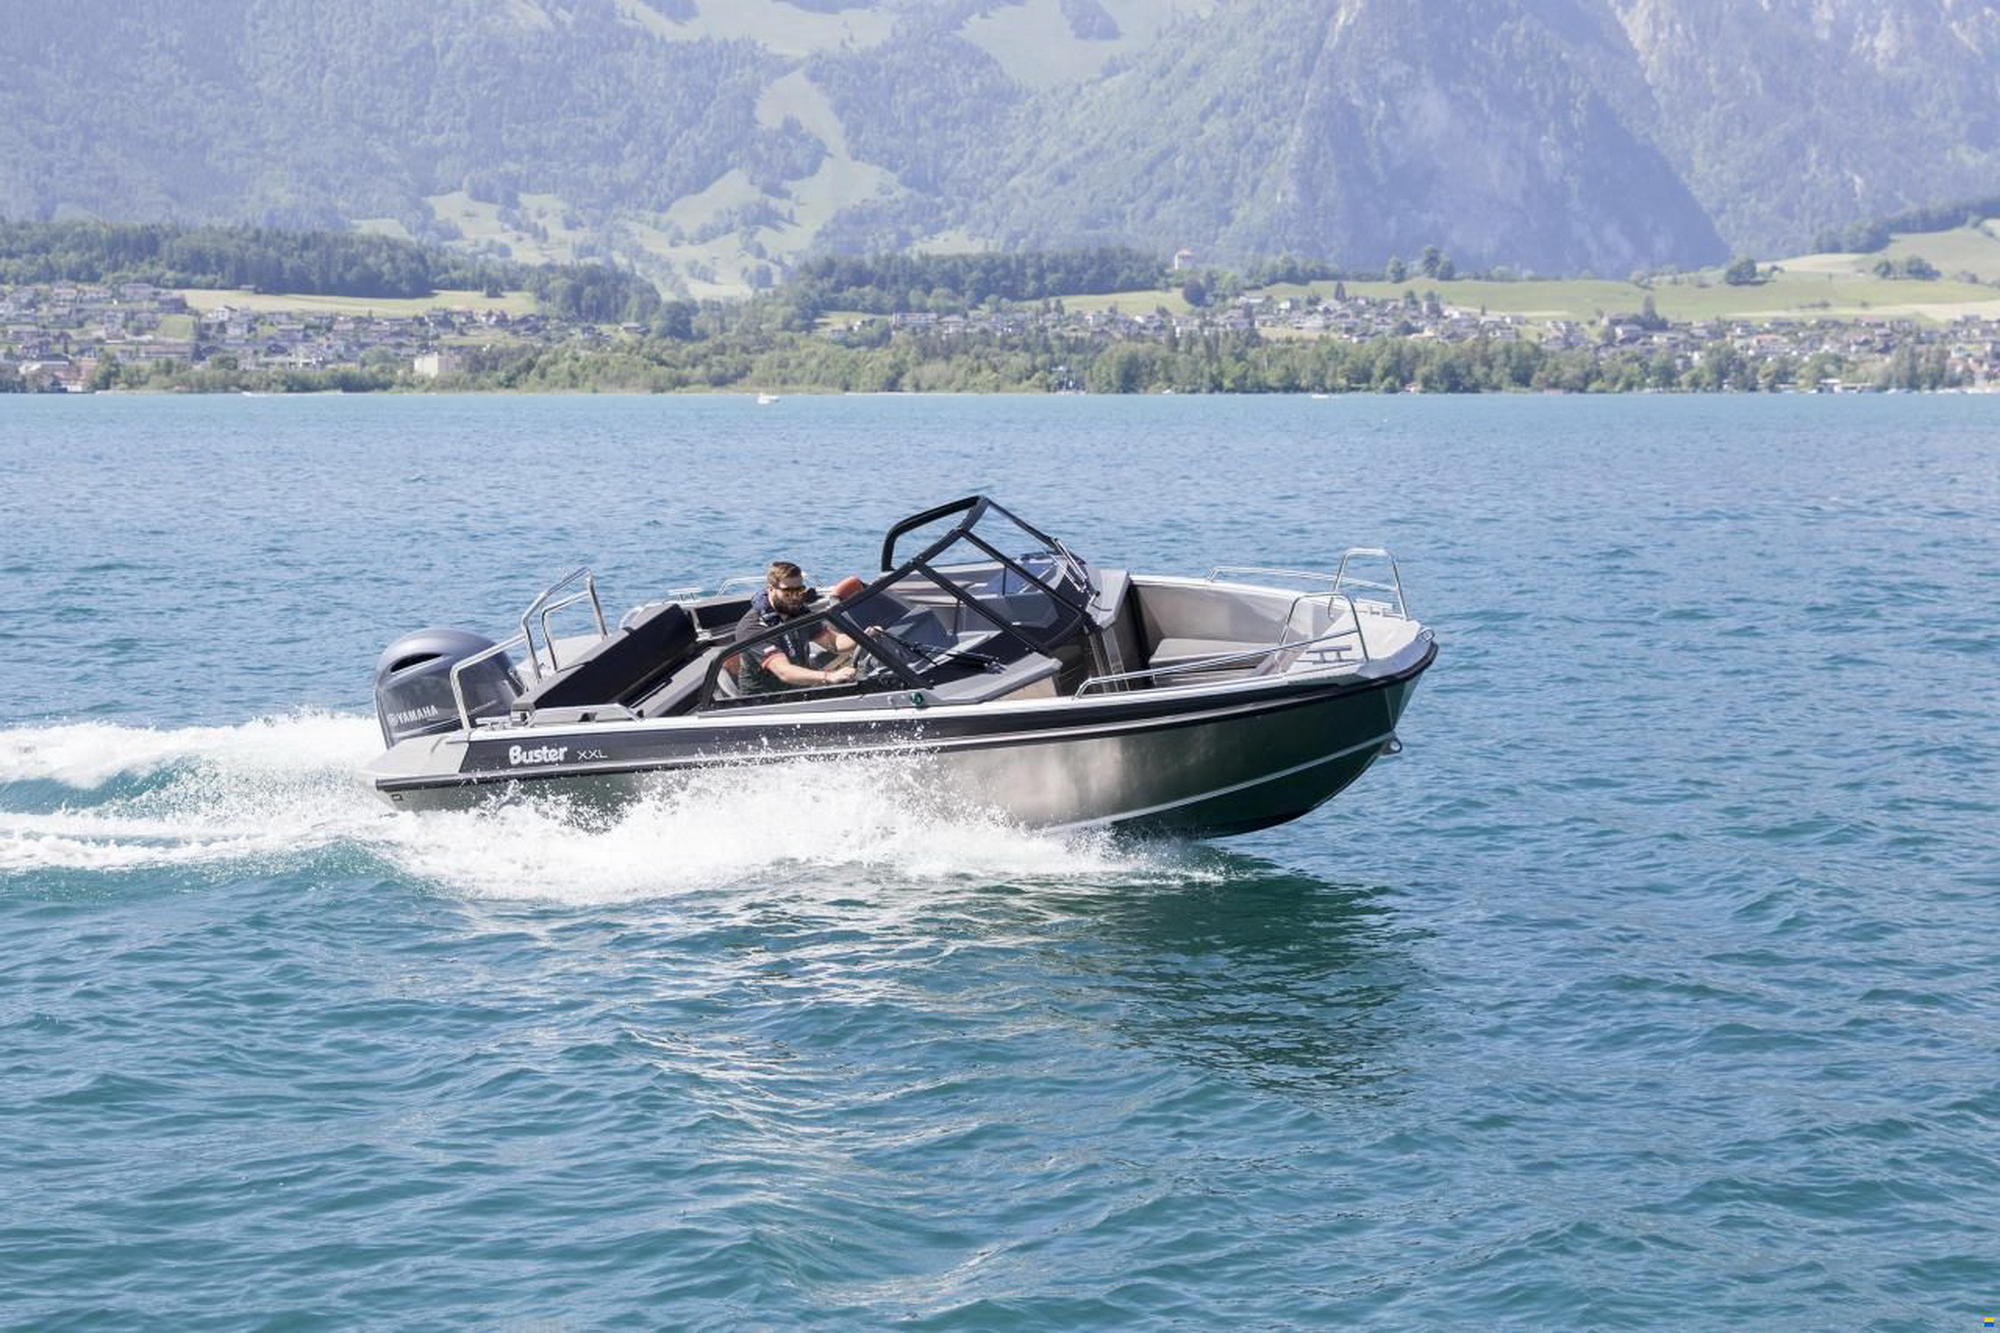 BUSTER XXL Q, BUSTER XXL, Алюминиевая лодка Buster, Алюминиевая лодка Buster XXL Q, Aluminium boat BUSTER XXL Q, Алюминиевая лодка Buster XXL, Aluminium boat BUSTER XXL, FISHFINDER package BUSTER XXL, FISHFINDER package buster, FISHFINDER package, fishing kit accessories buster